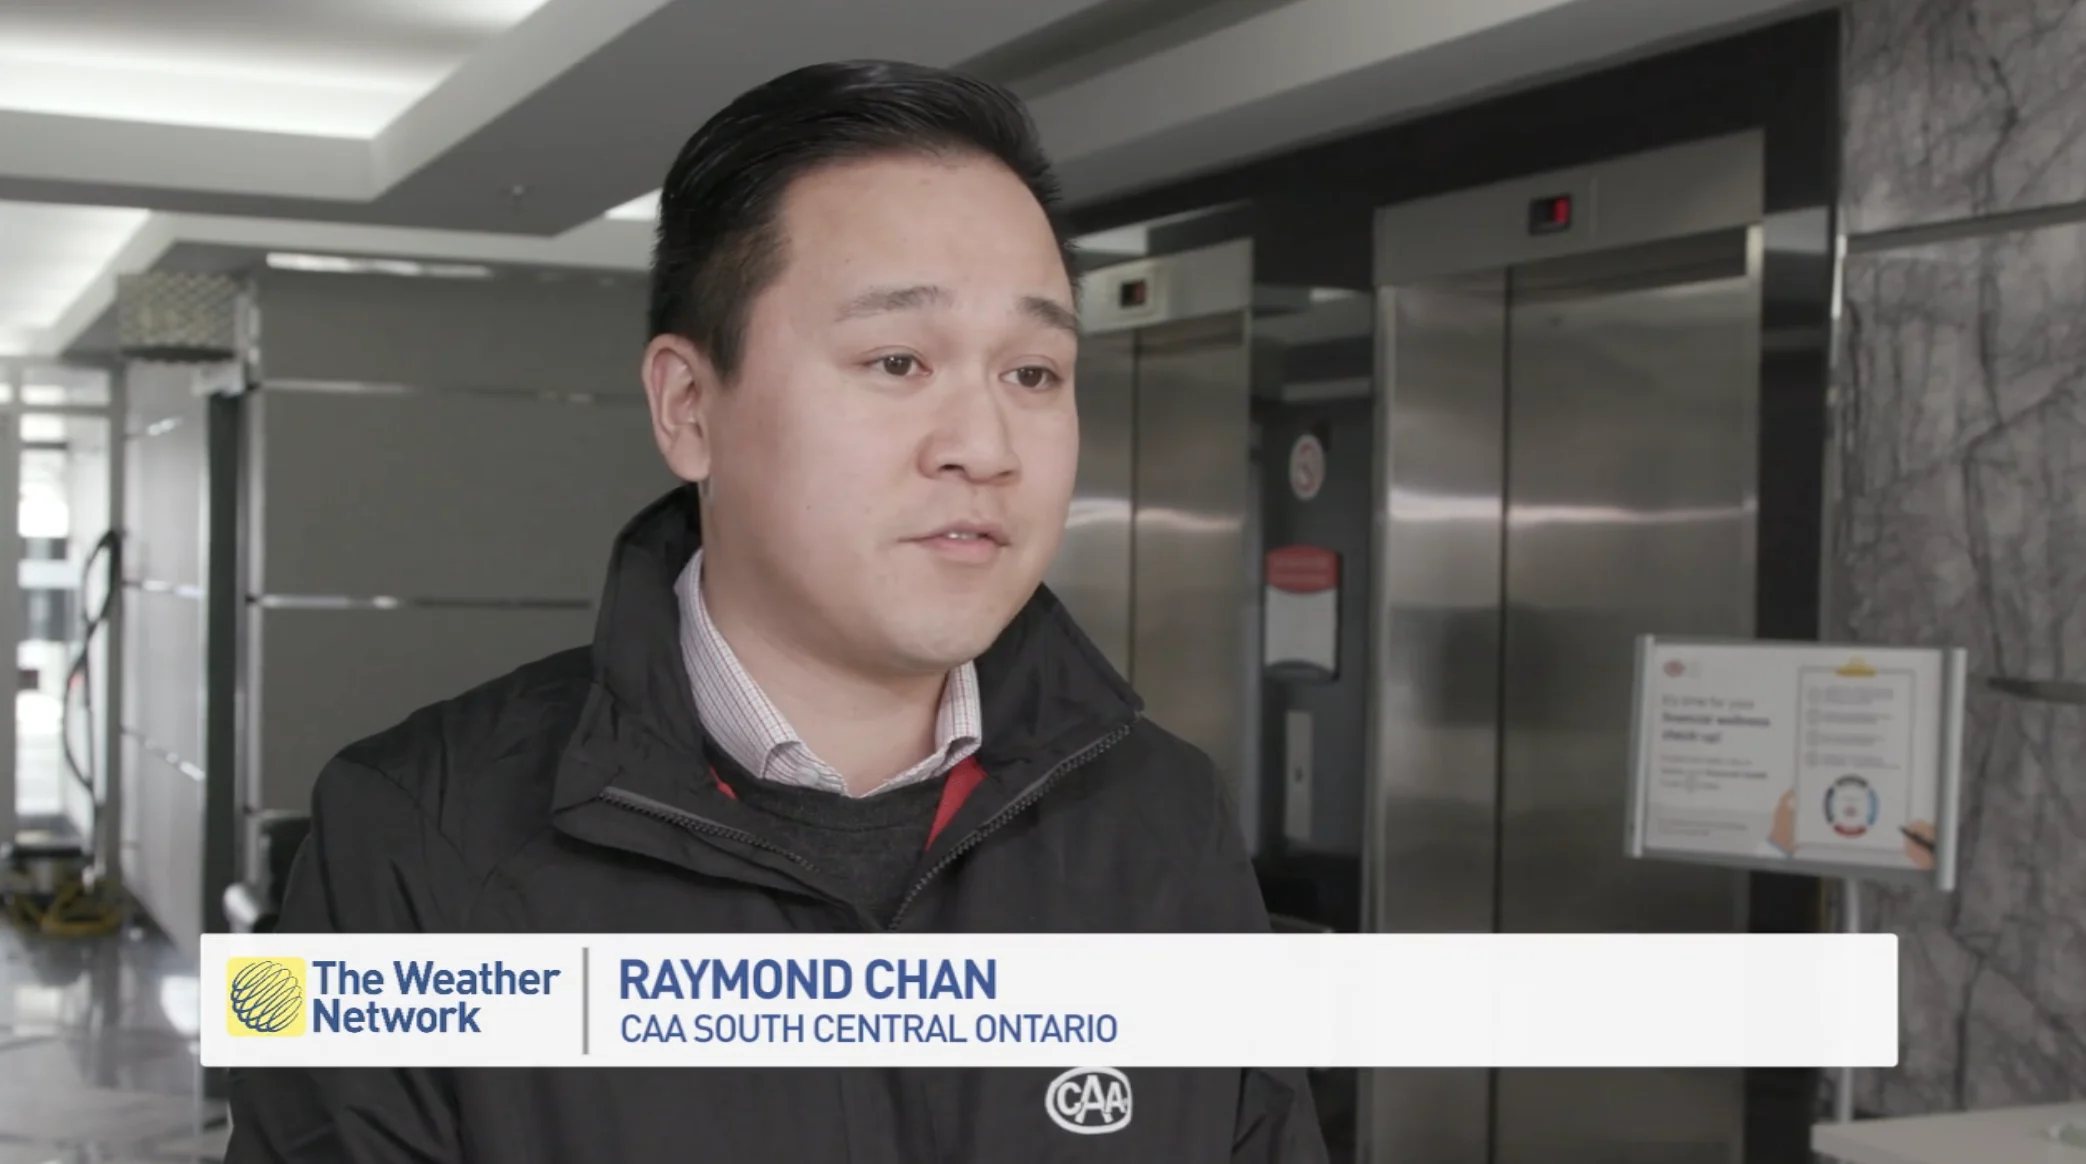 Raymond Chan from CAA South Central Ontario